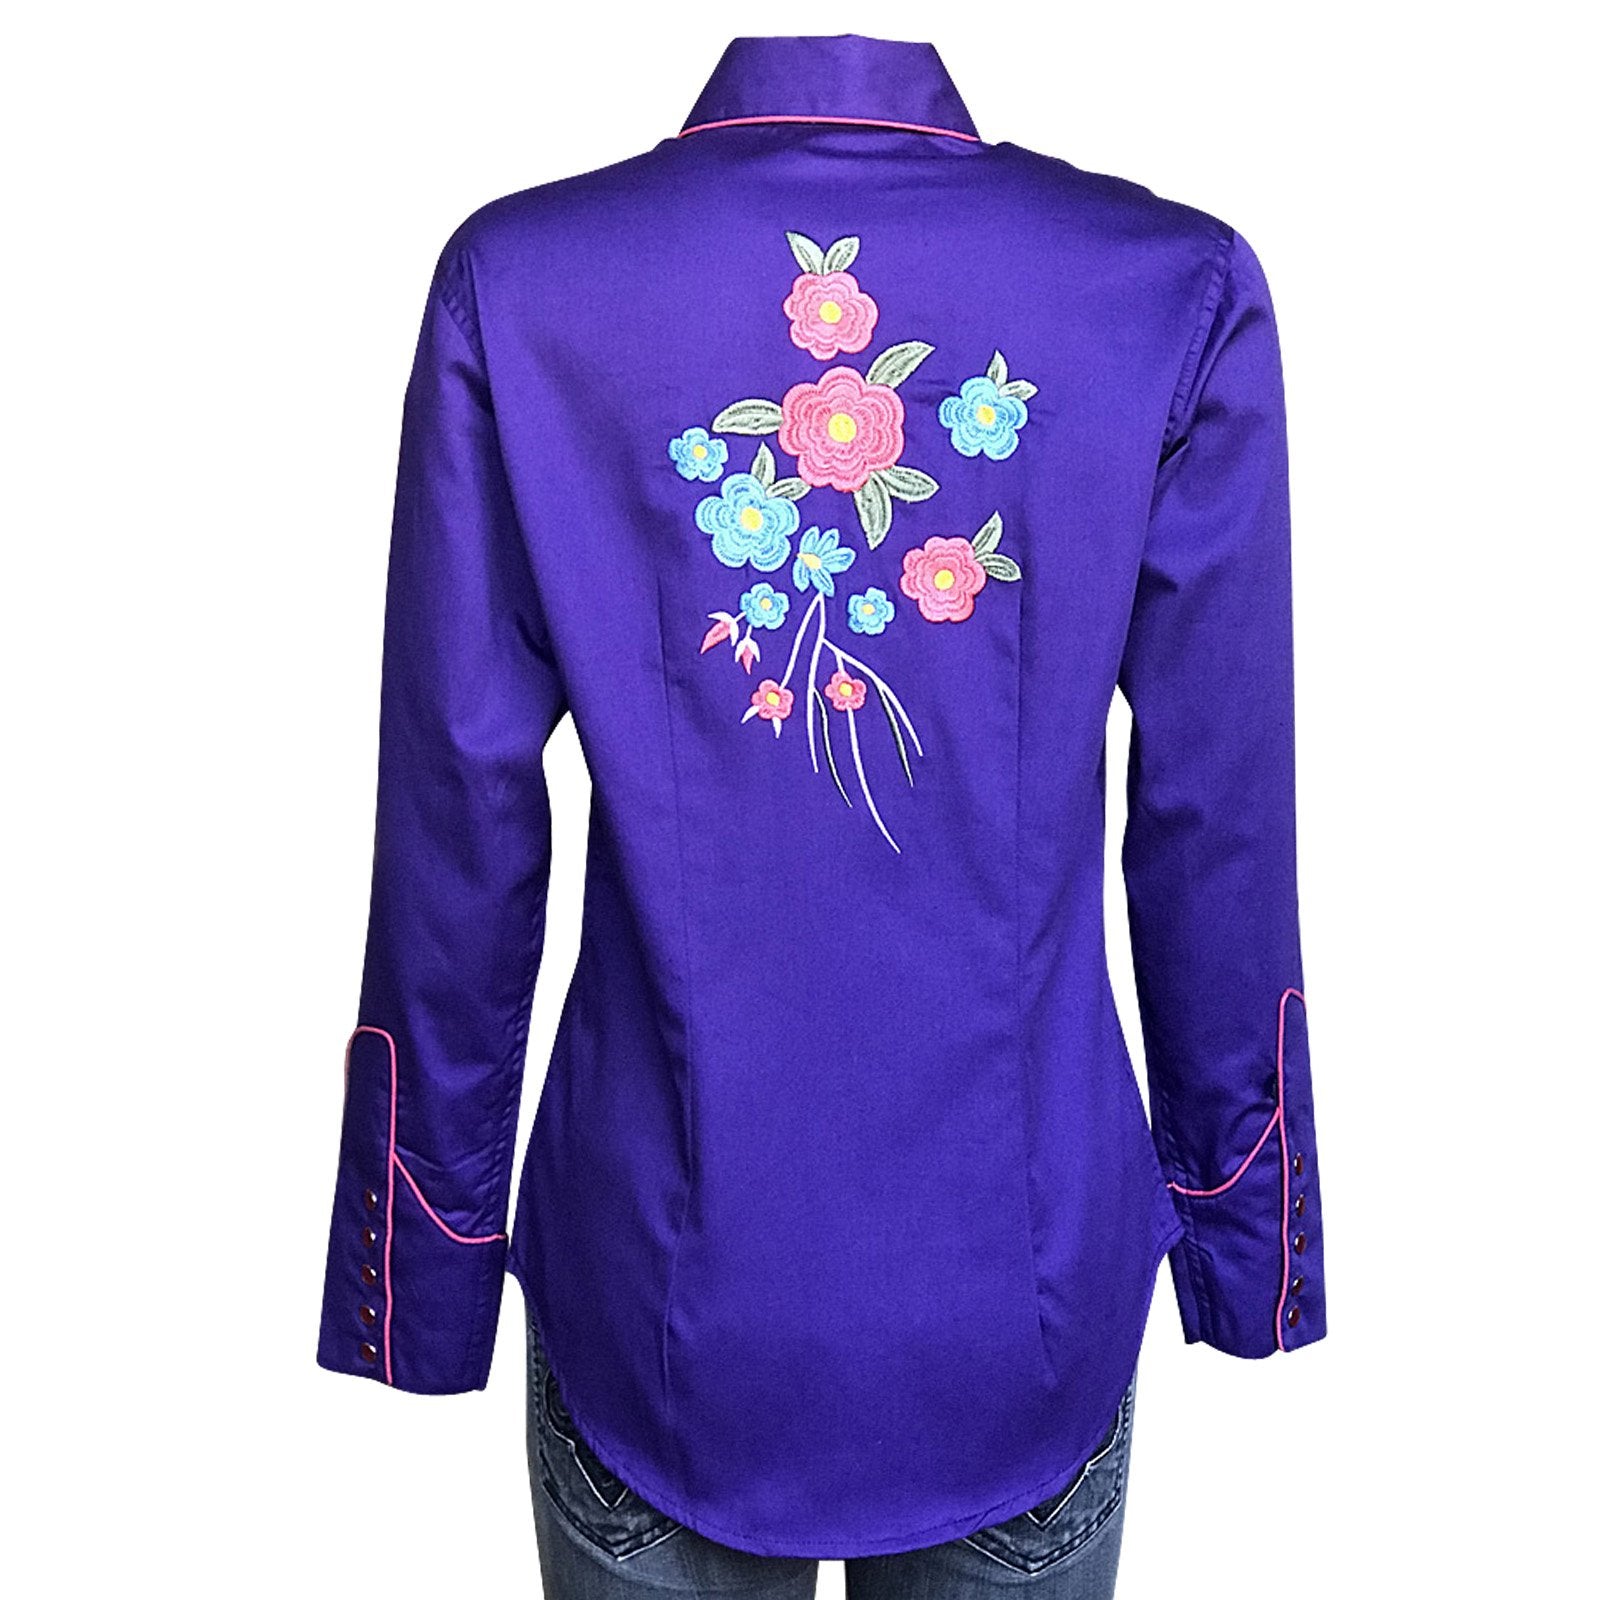 Rockmount Ranch Wear Ladies' Vintage Inspired Western Shirt Embroidered Blooms on Purple Back